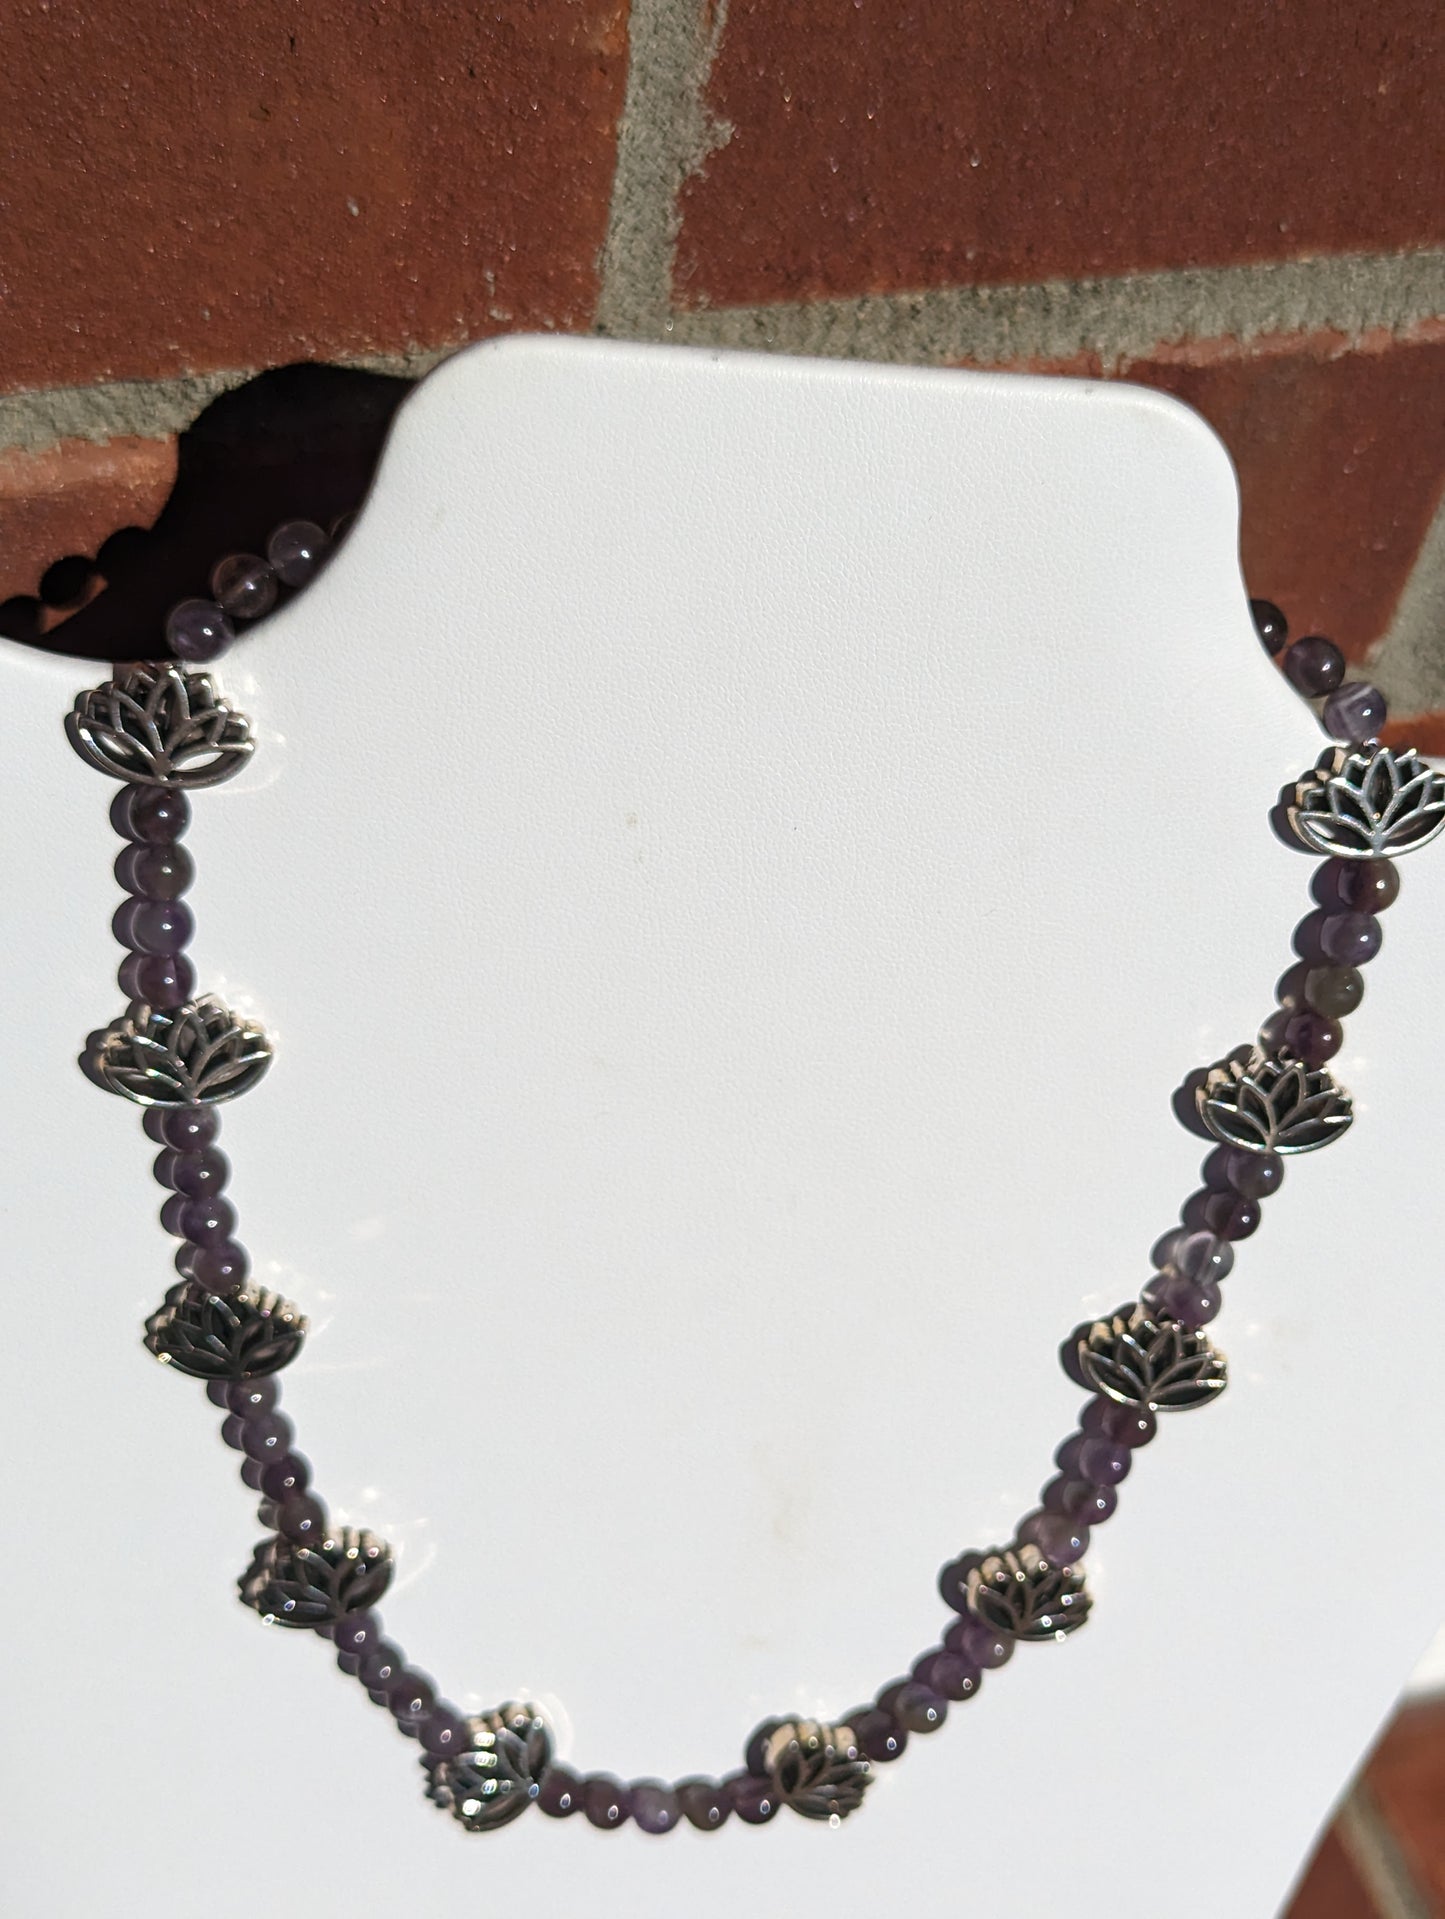 Amethyst Necklace with Lotus Beads